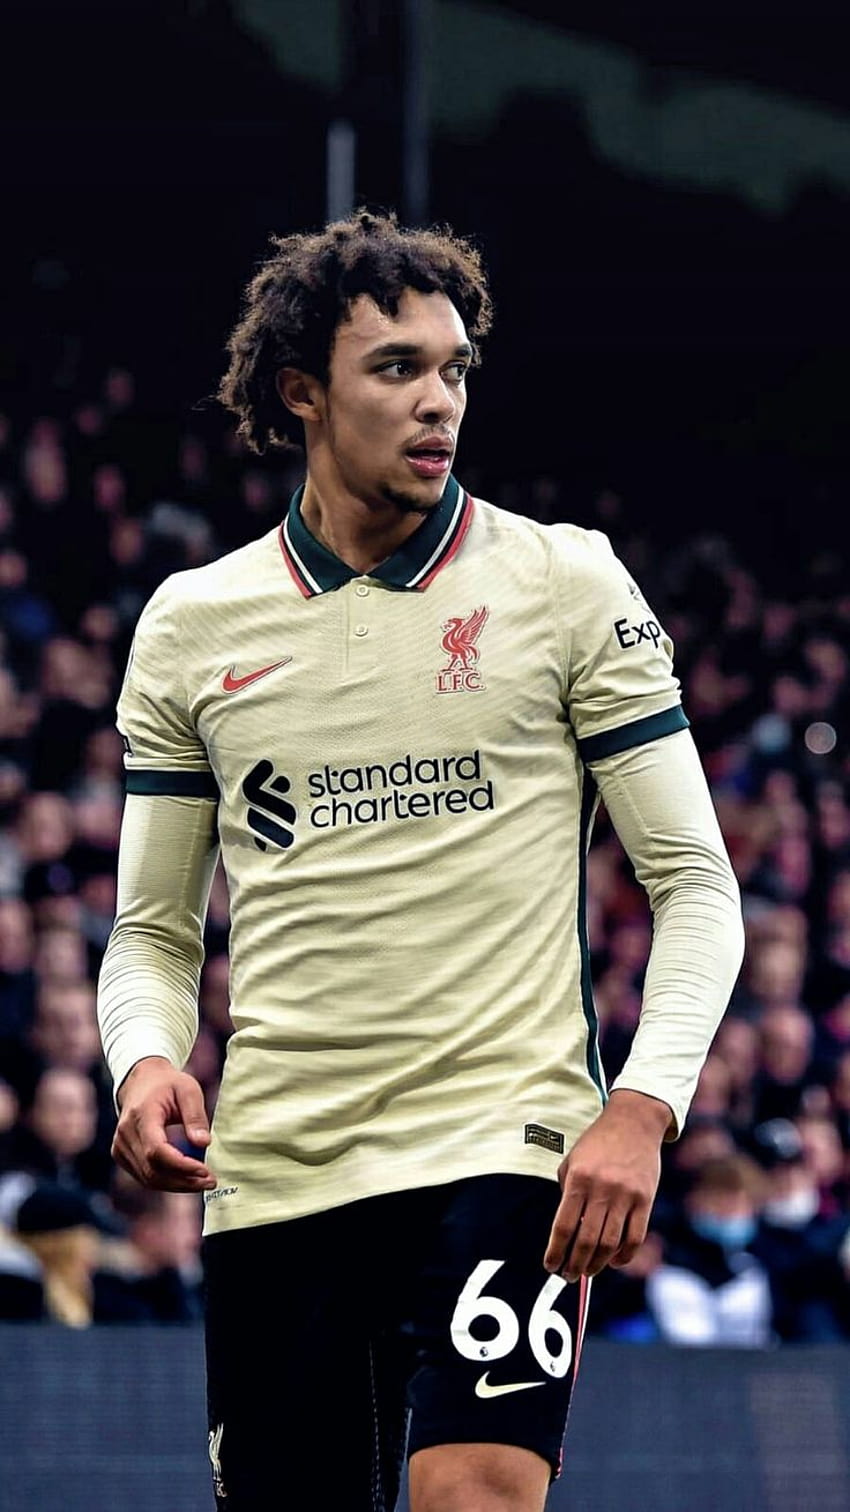 Liverpool FC  Its a shirt number Trent AlexanderArnold has made popular  with his achievements at a tender age  Heres why the scouser wears  No66 for the Reds bitly3bot11W  Facebook